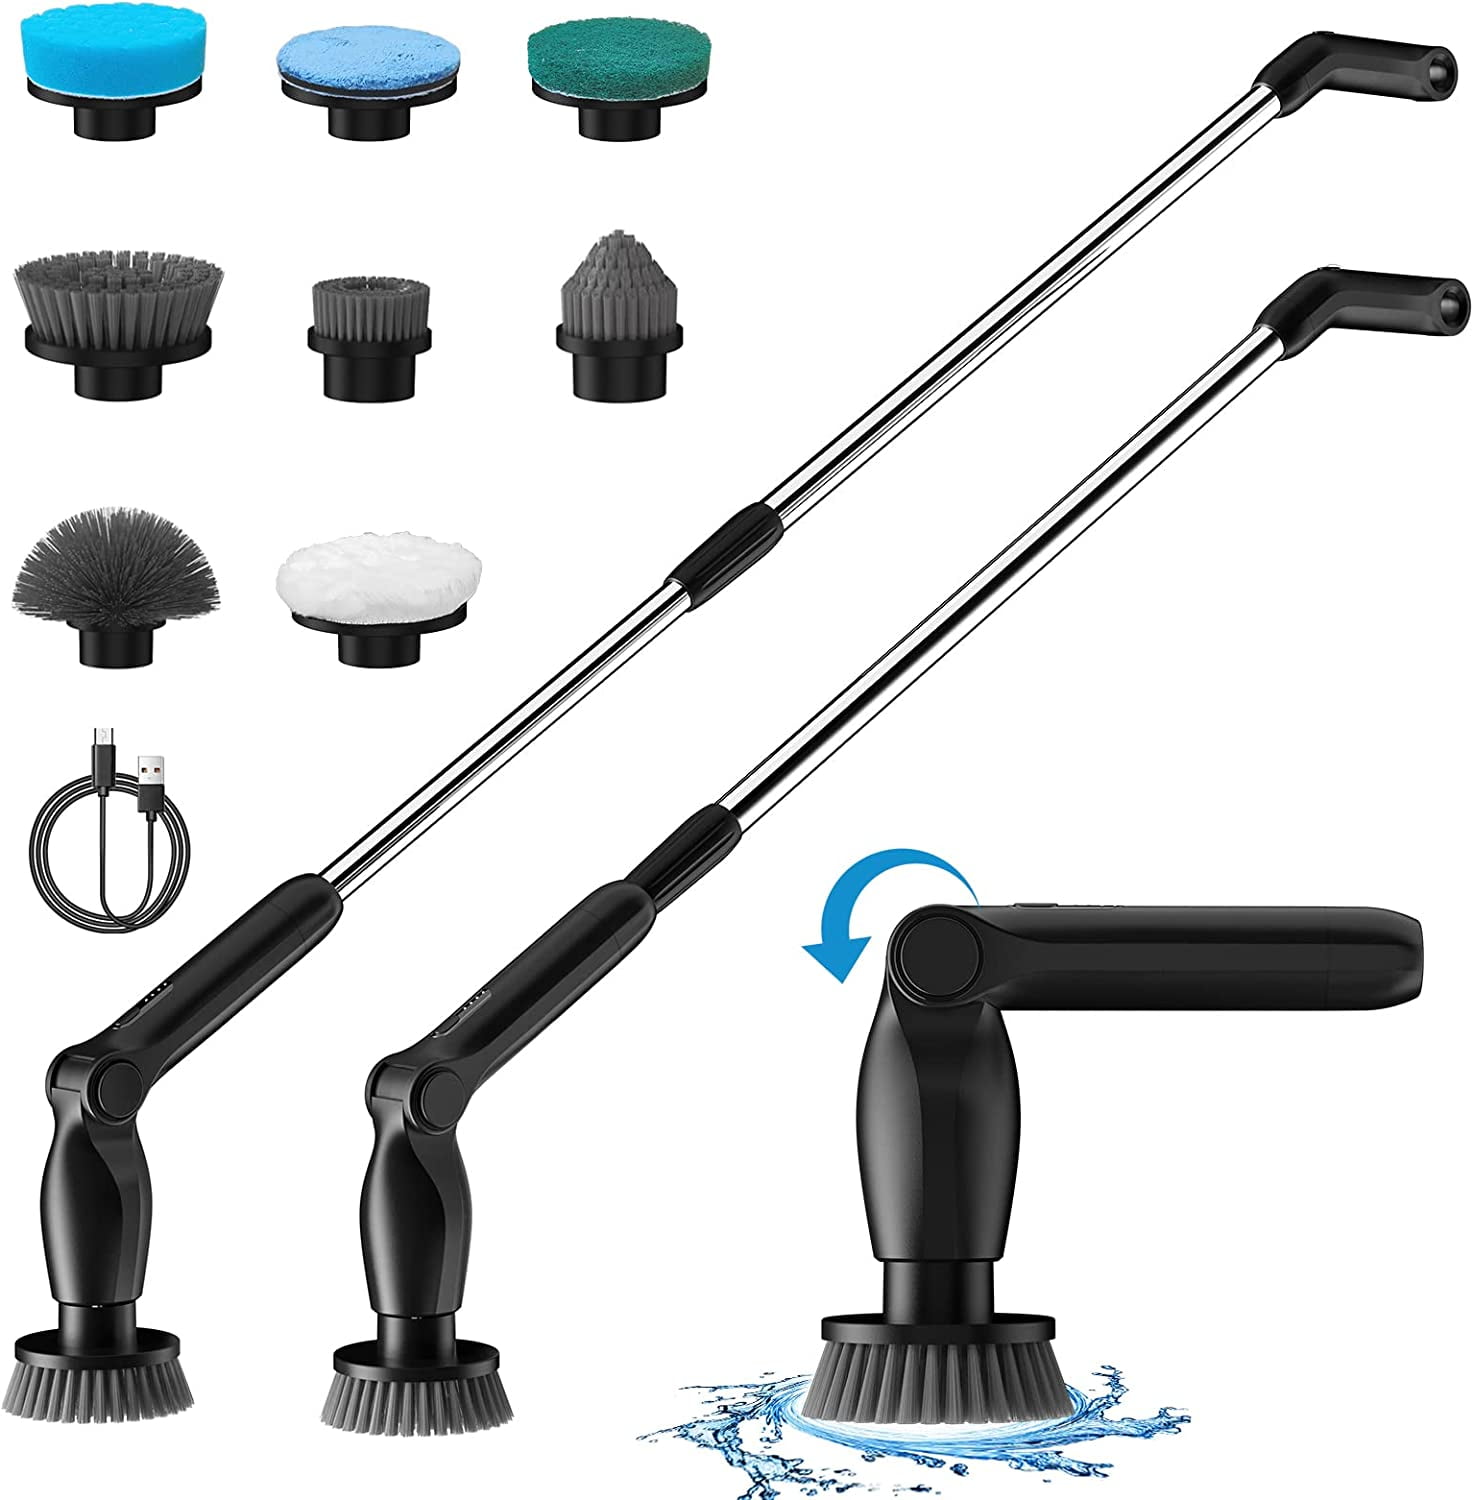 Jorking Multi-functional Rechargeable Power Scrubber, Cleaning Spin Brush  with 8 Brush Heads and Adjustable Extension Handle HD1010 - The Home Depot